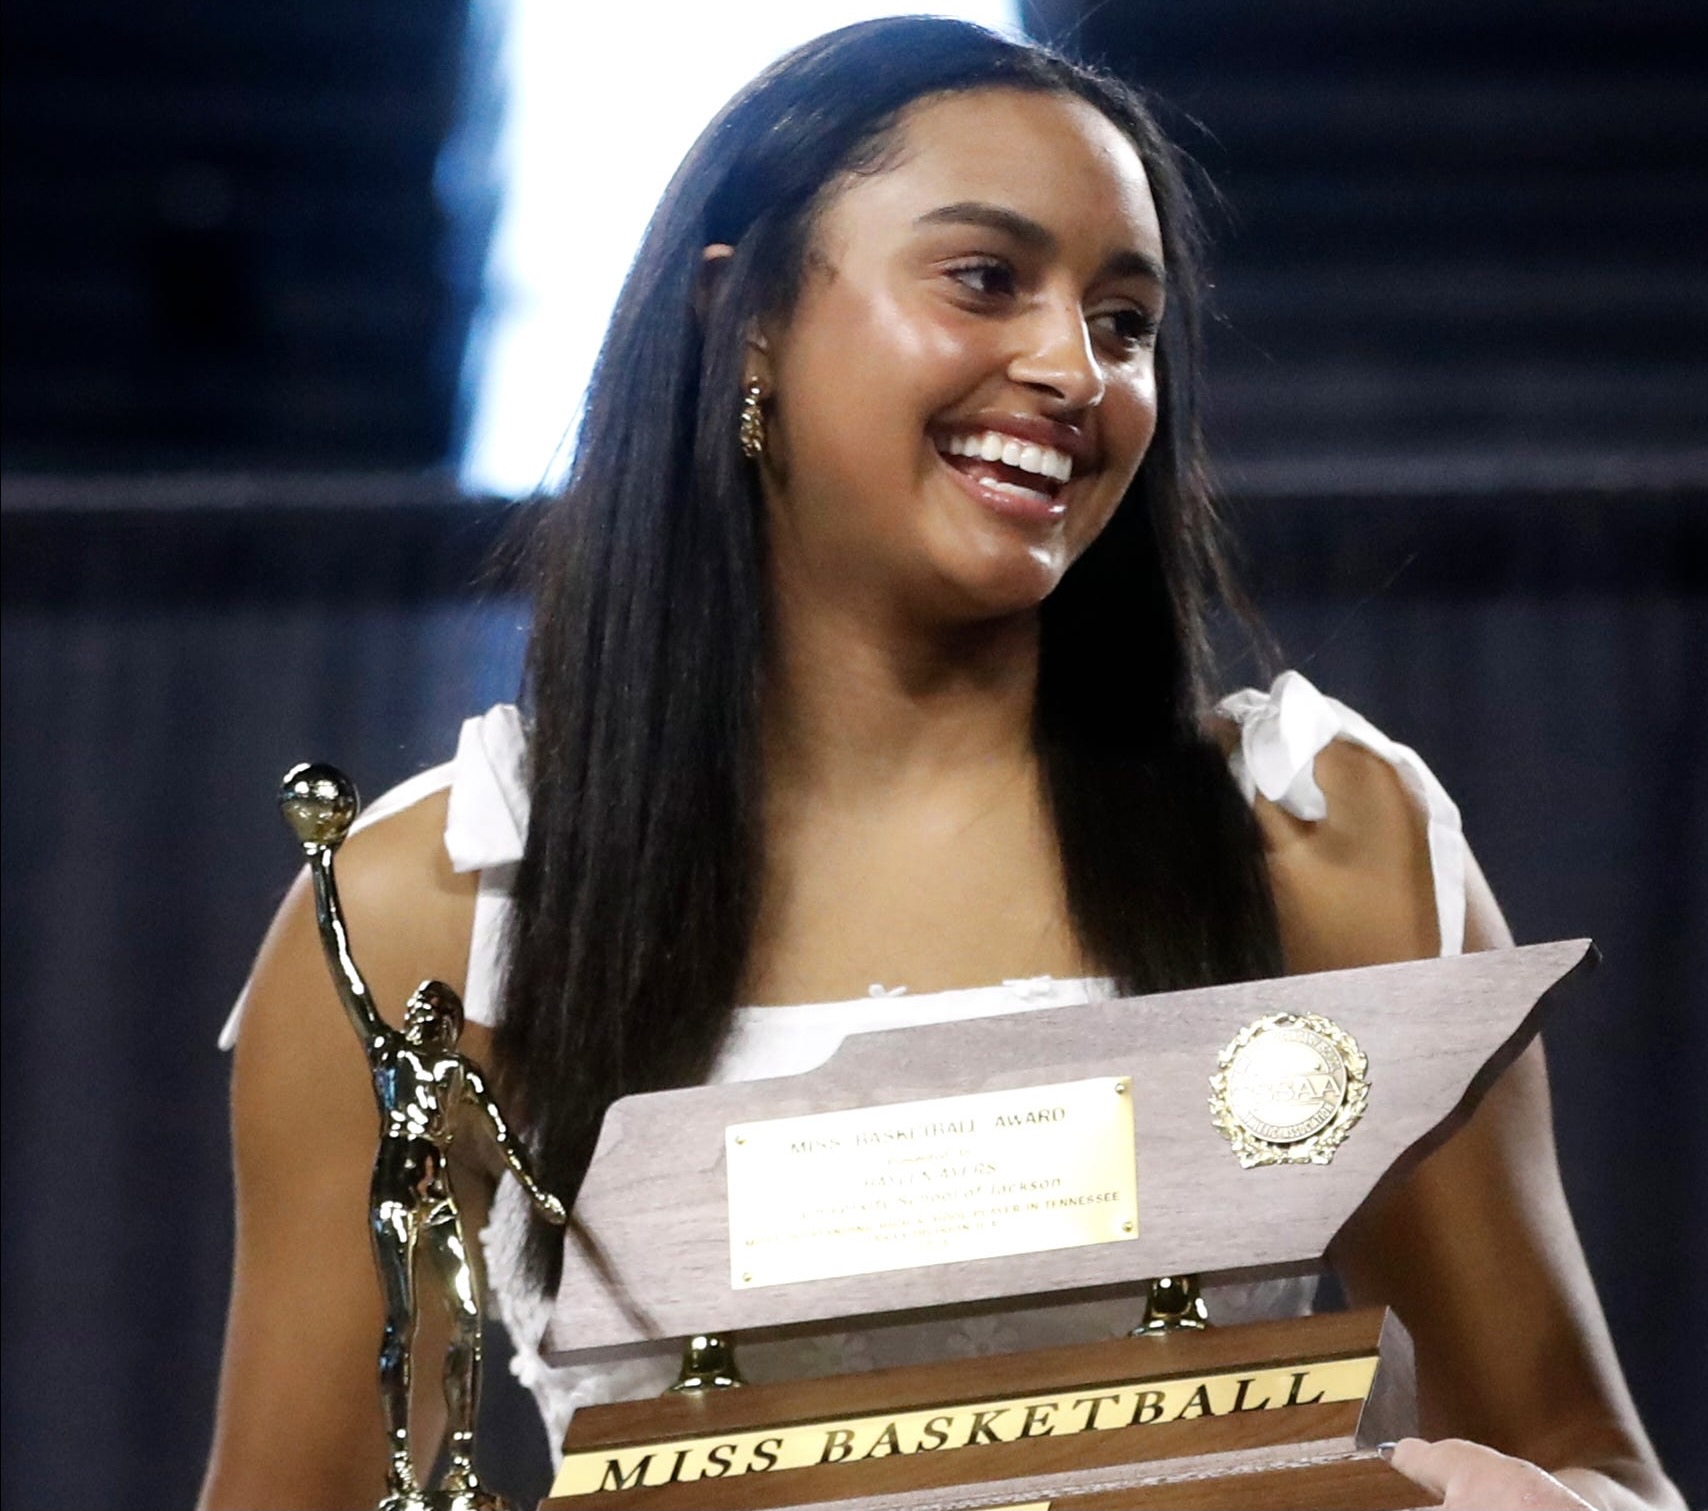 Two-sport star Haylen Ayers was named Tennessee Miss Basketball earlier this month. Now she's starring on the softball field for the University School of Jackson.